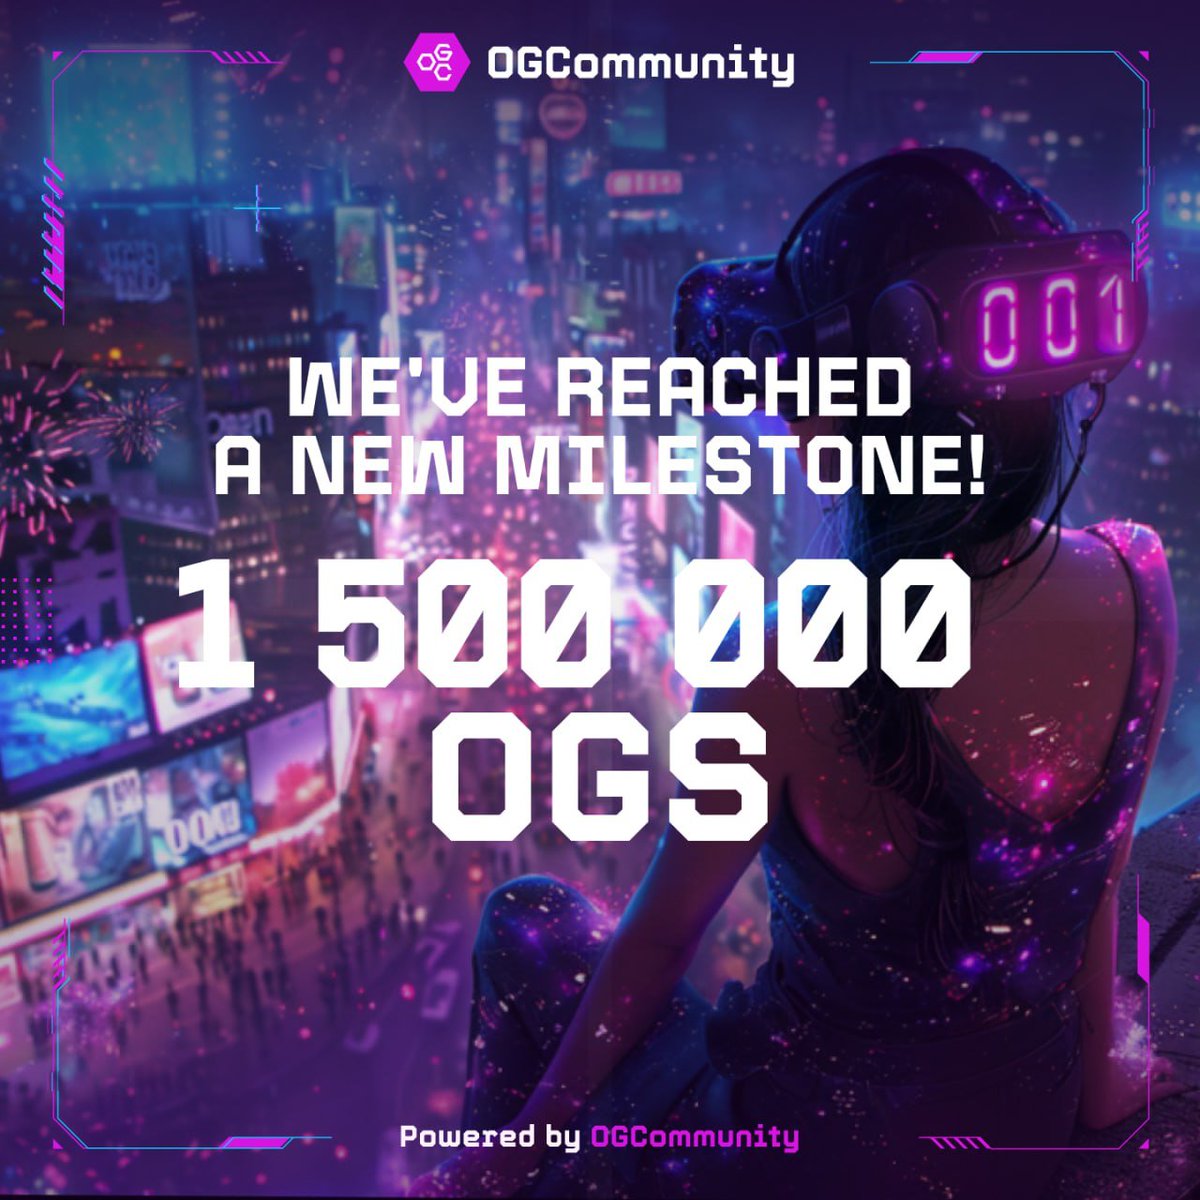 # 1 500 000 members in OGCommunity! We're unstoppable! 🔥 We've just hit 1,5M OGs in our community — faster than our wildest expectations! 😱 No surprise: so much wonderful news in the last few days, and so much more to come ❗️✅ #OGCommunity #ogcommunityX #OGC #Web3